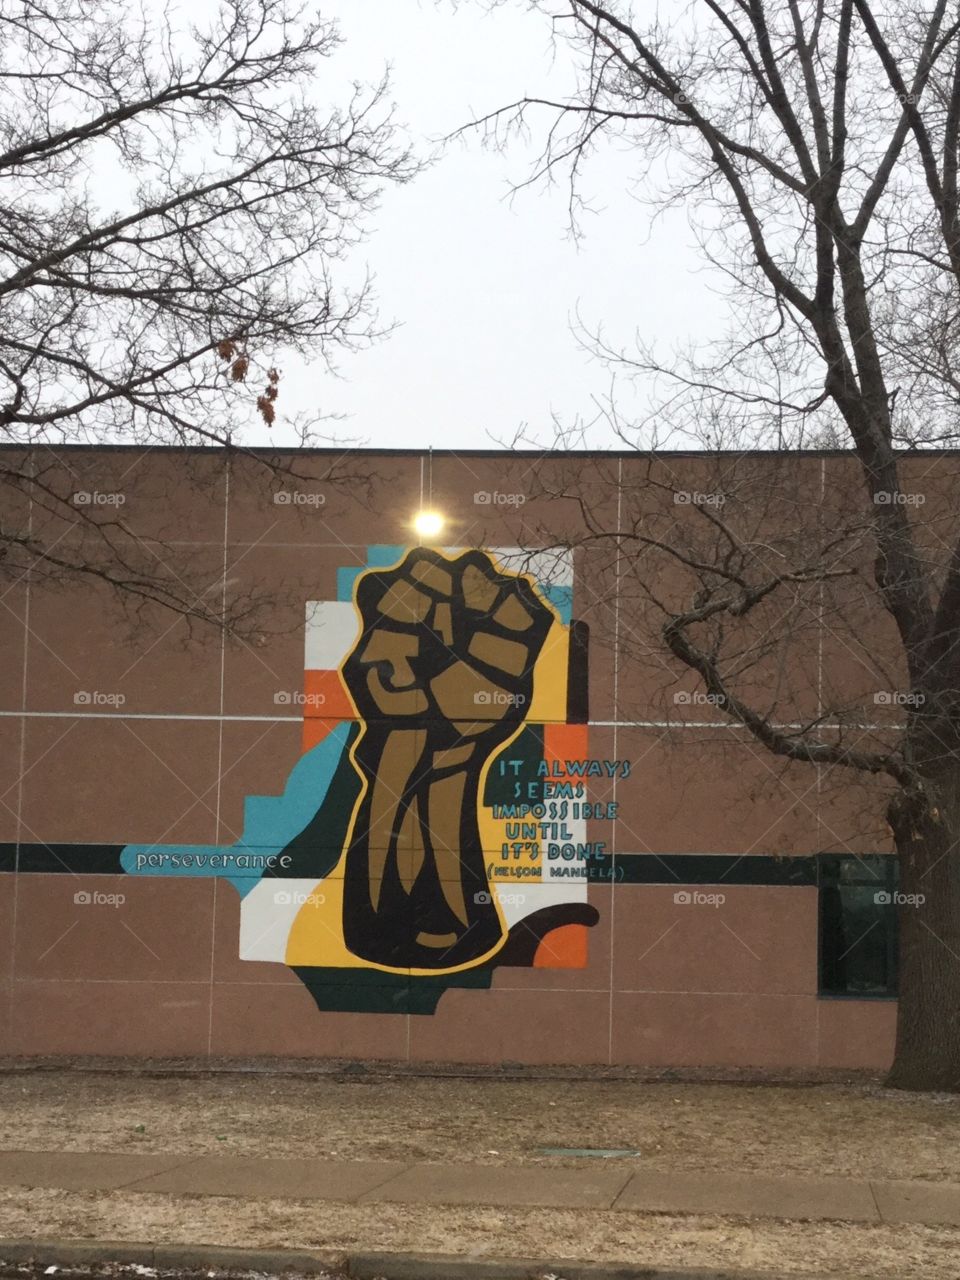 Inspirational mural on the local rec center.